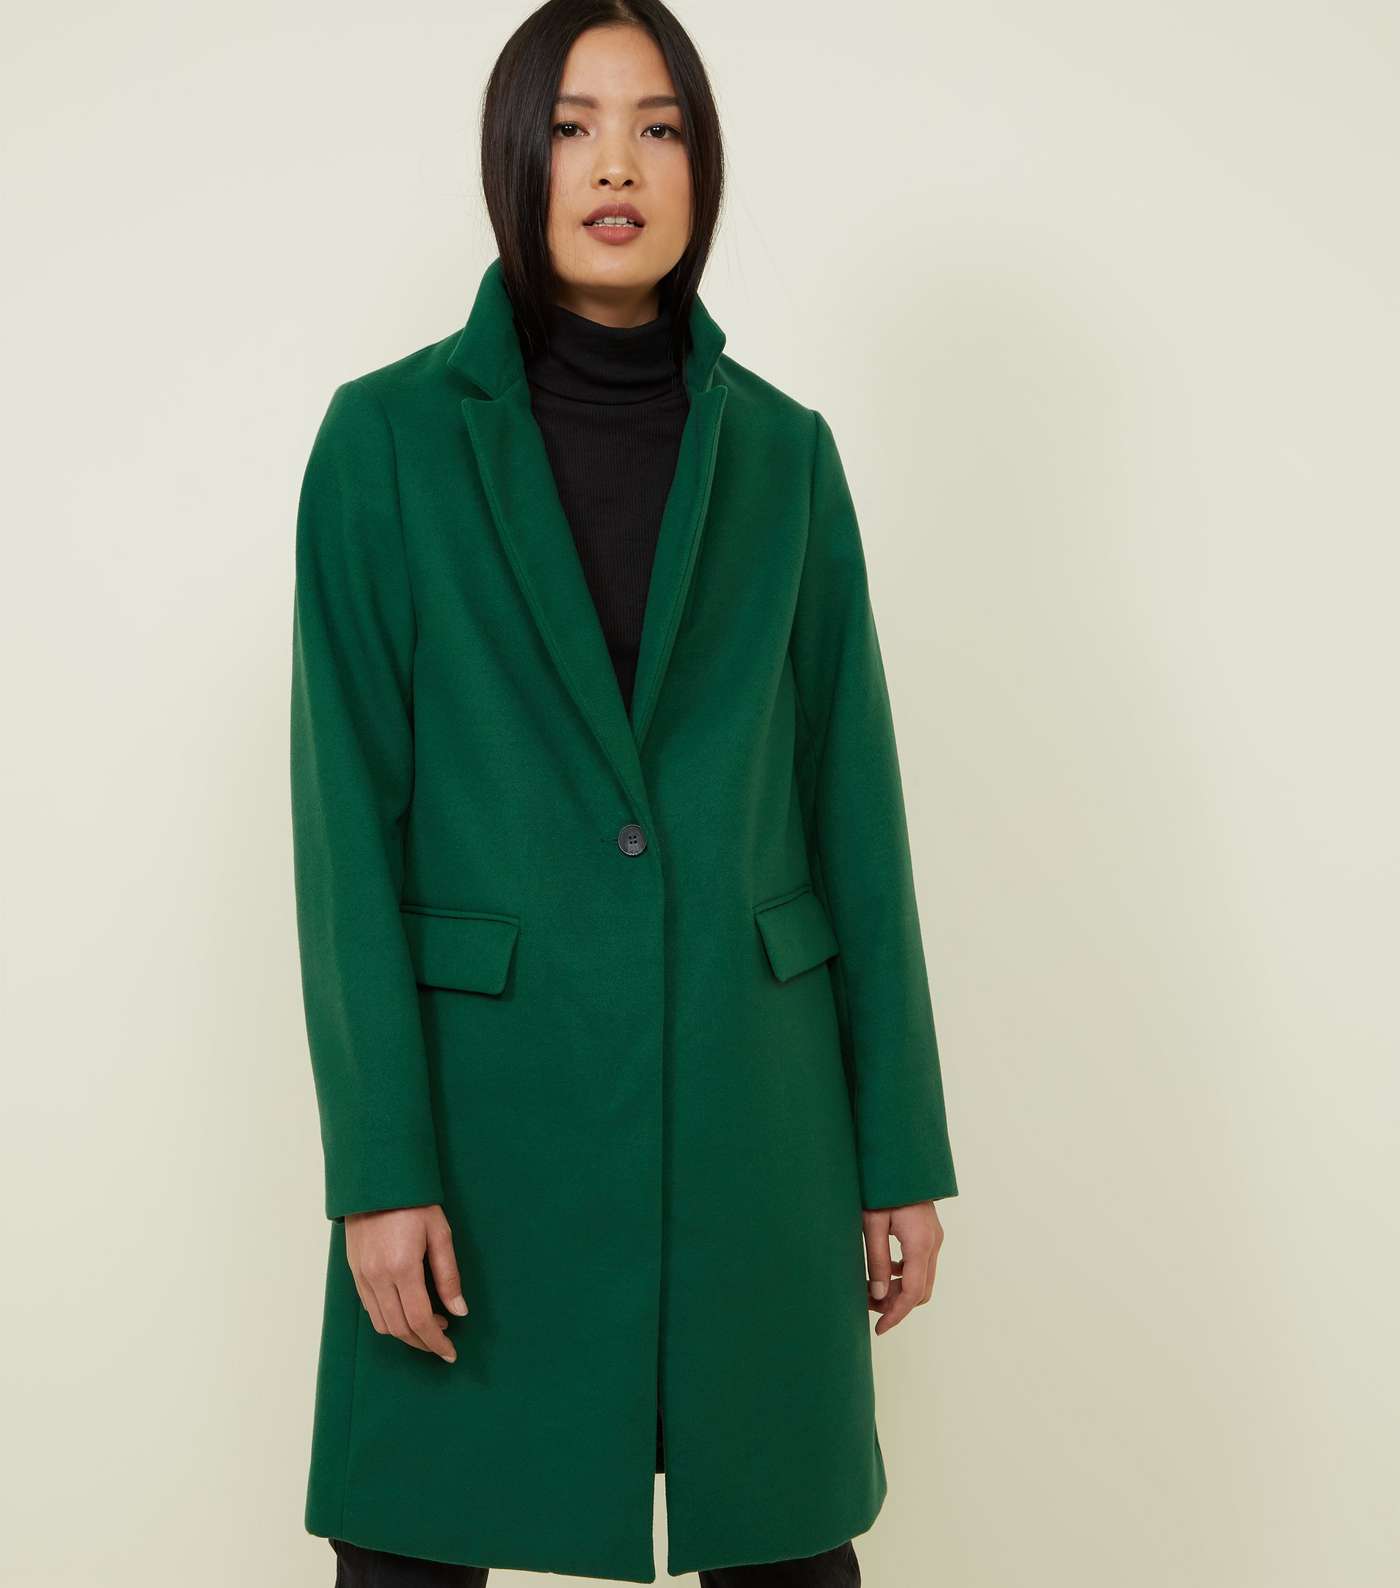 Green Single Breasted Formal Coat Image 2